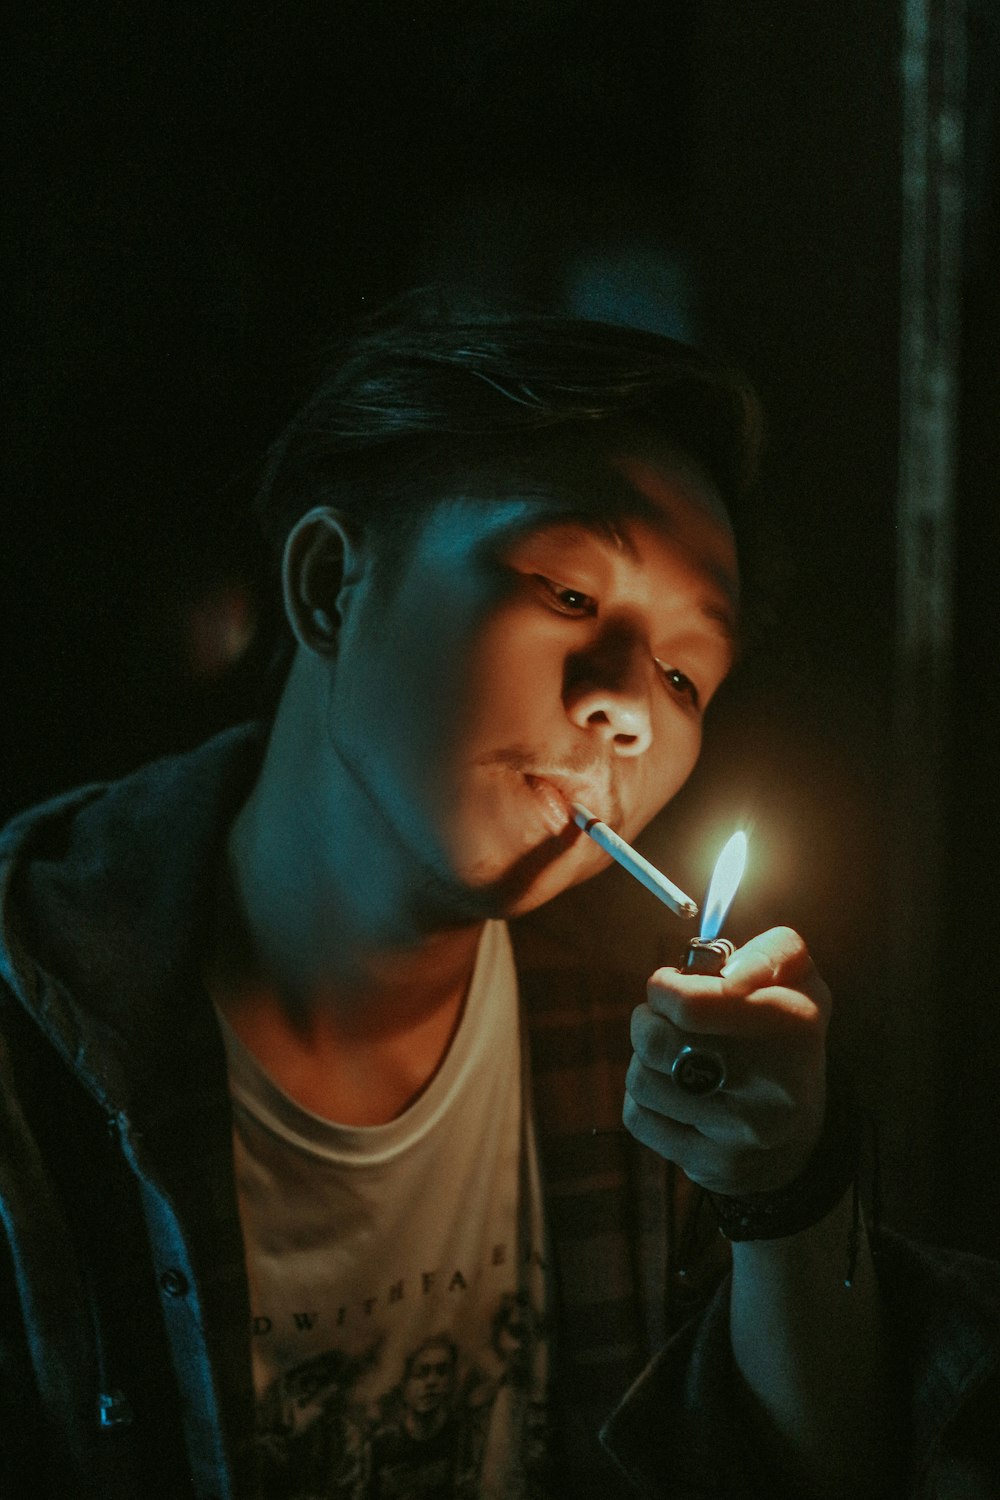 man lighting cigarette in his mouth